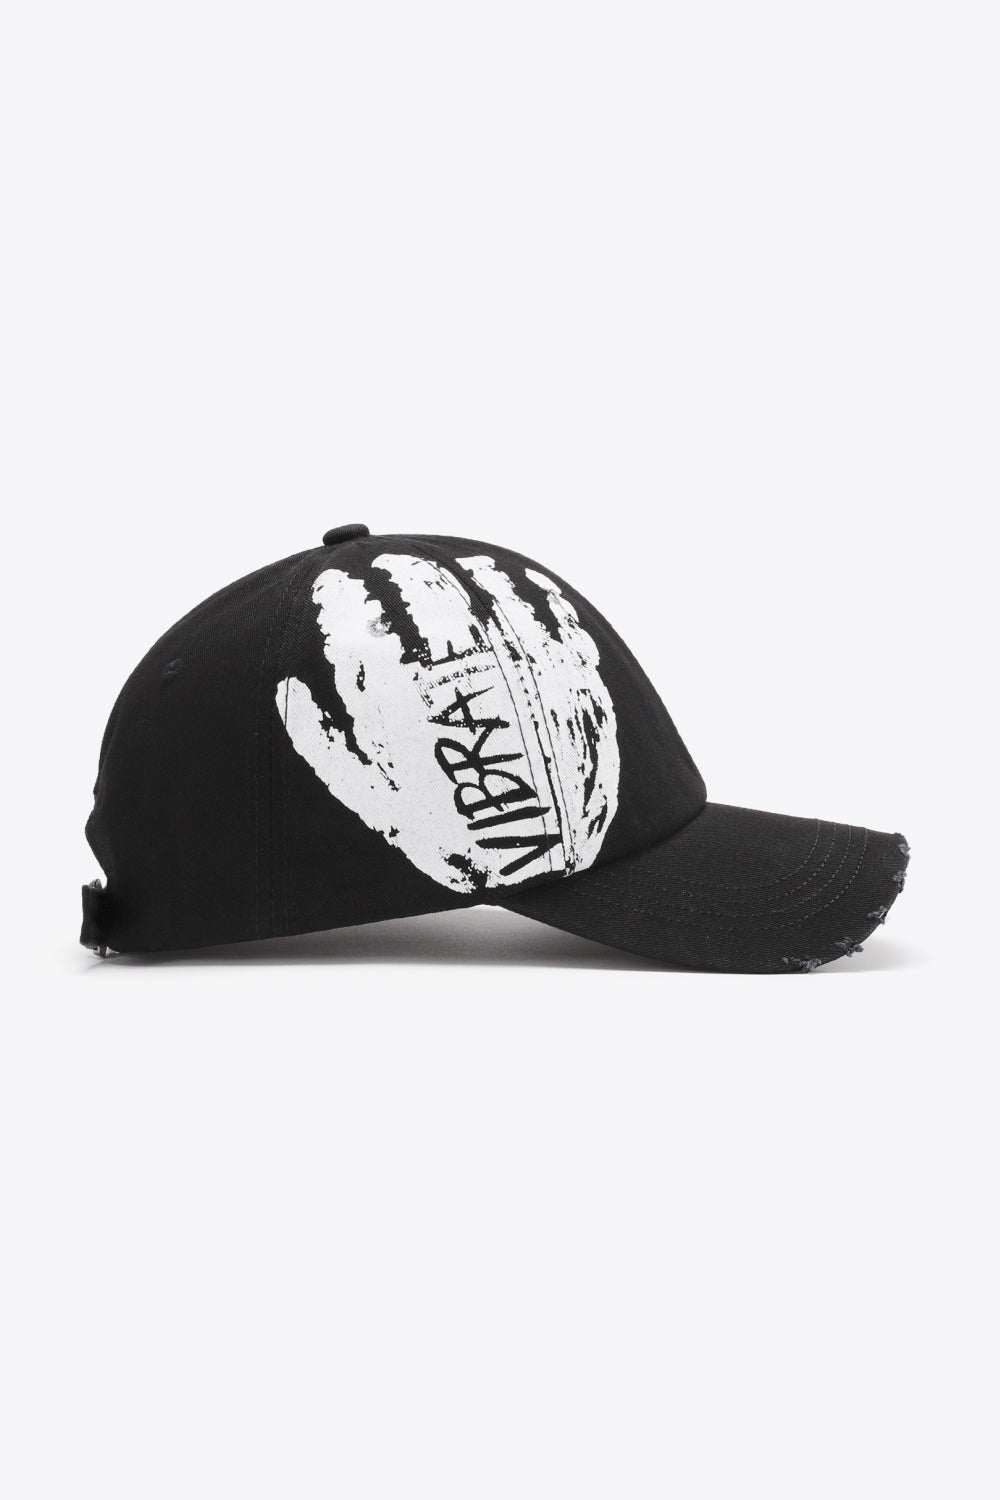 VIBRA Graphic Distressed Adjustable Baseball Cap - Online Only